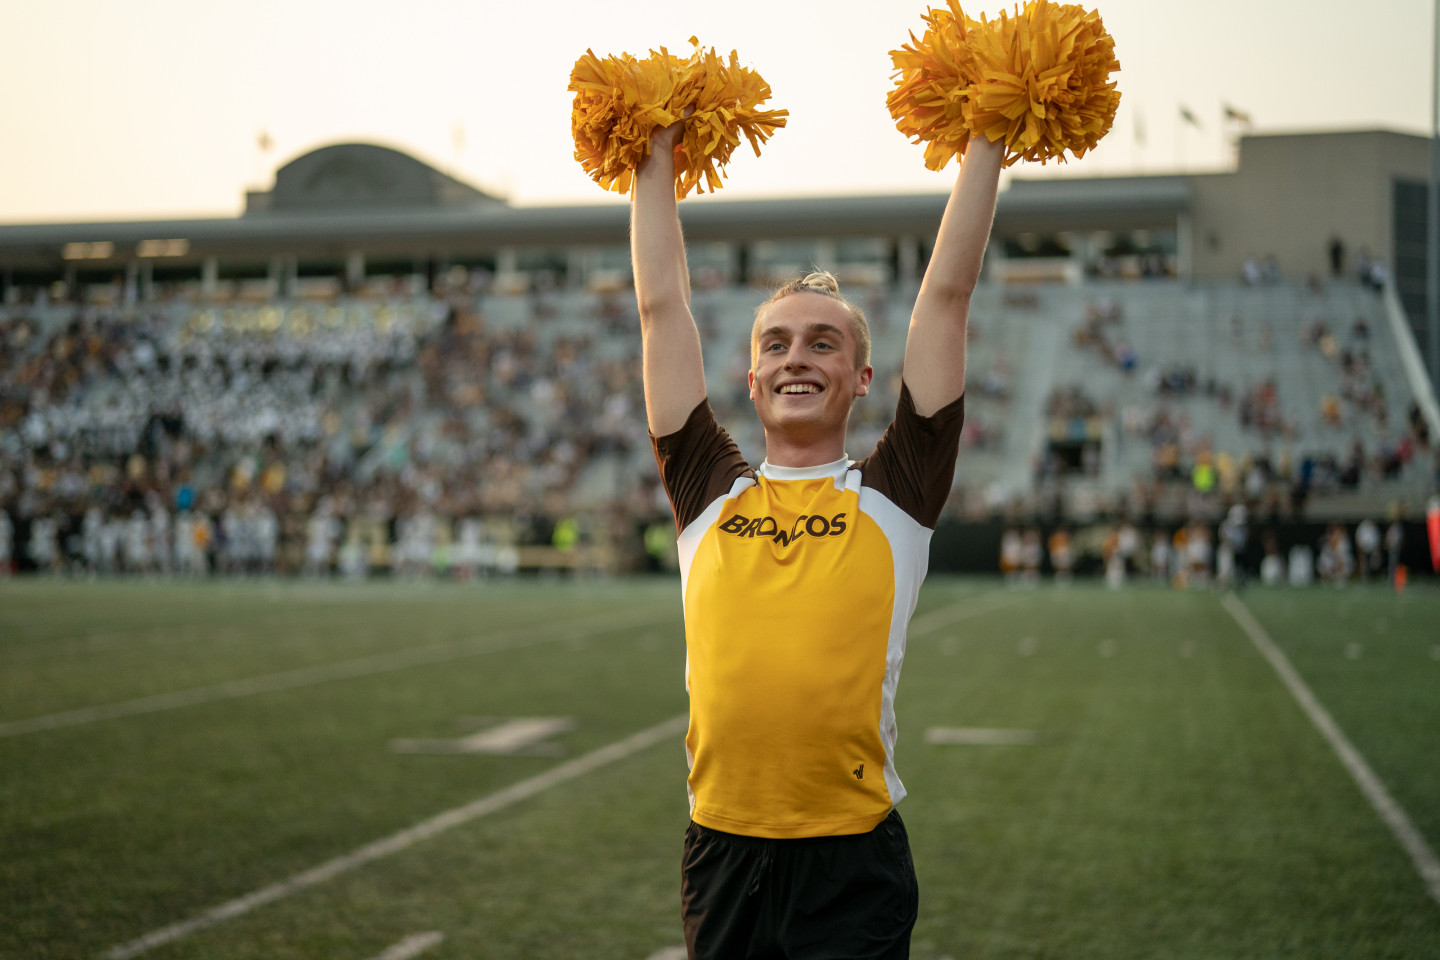 Nik McNees performs with pompoms held high in the air.